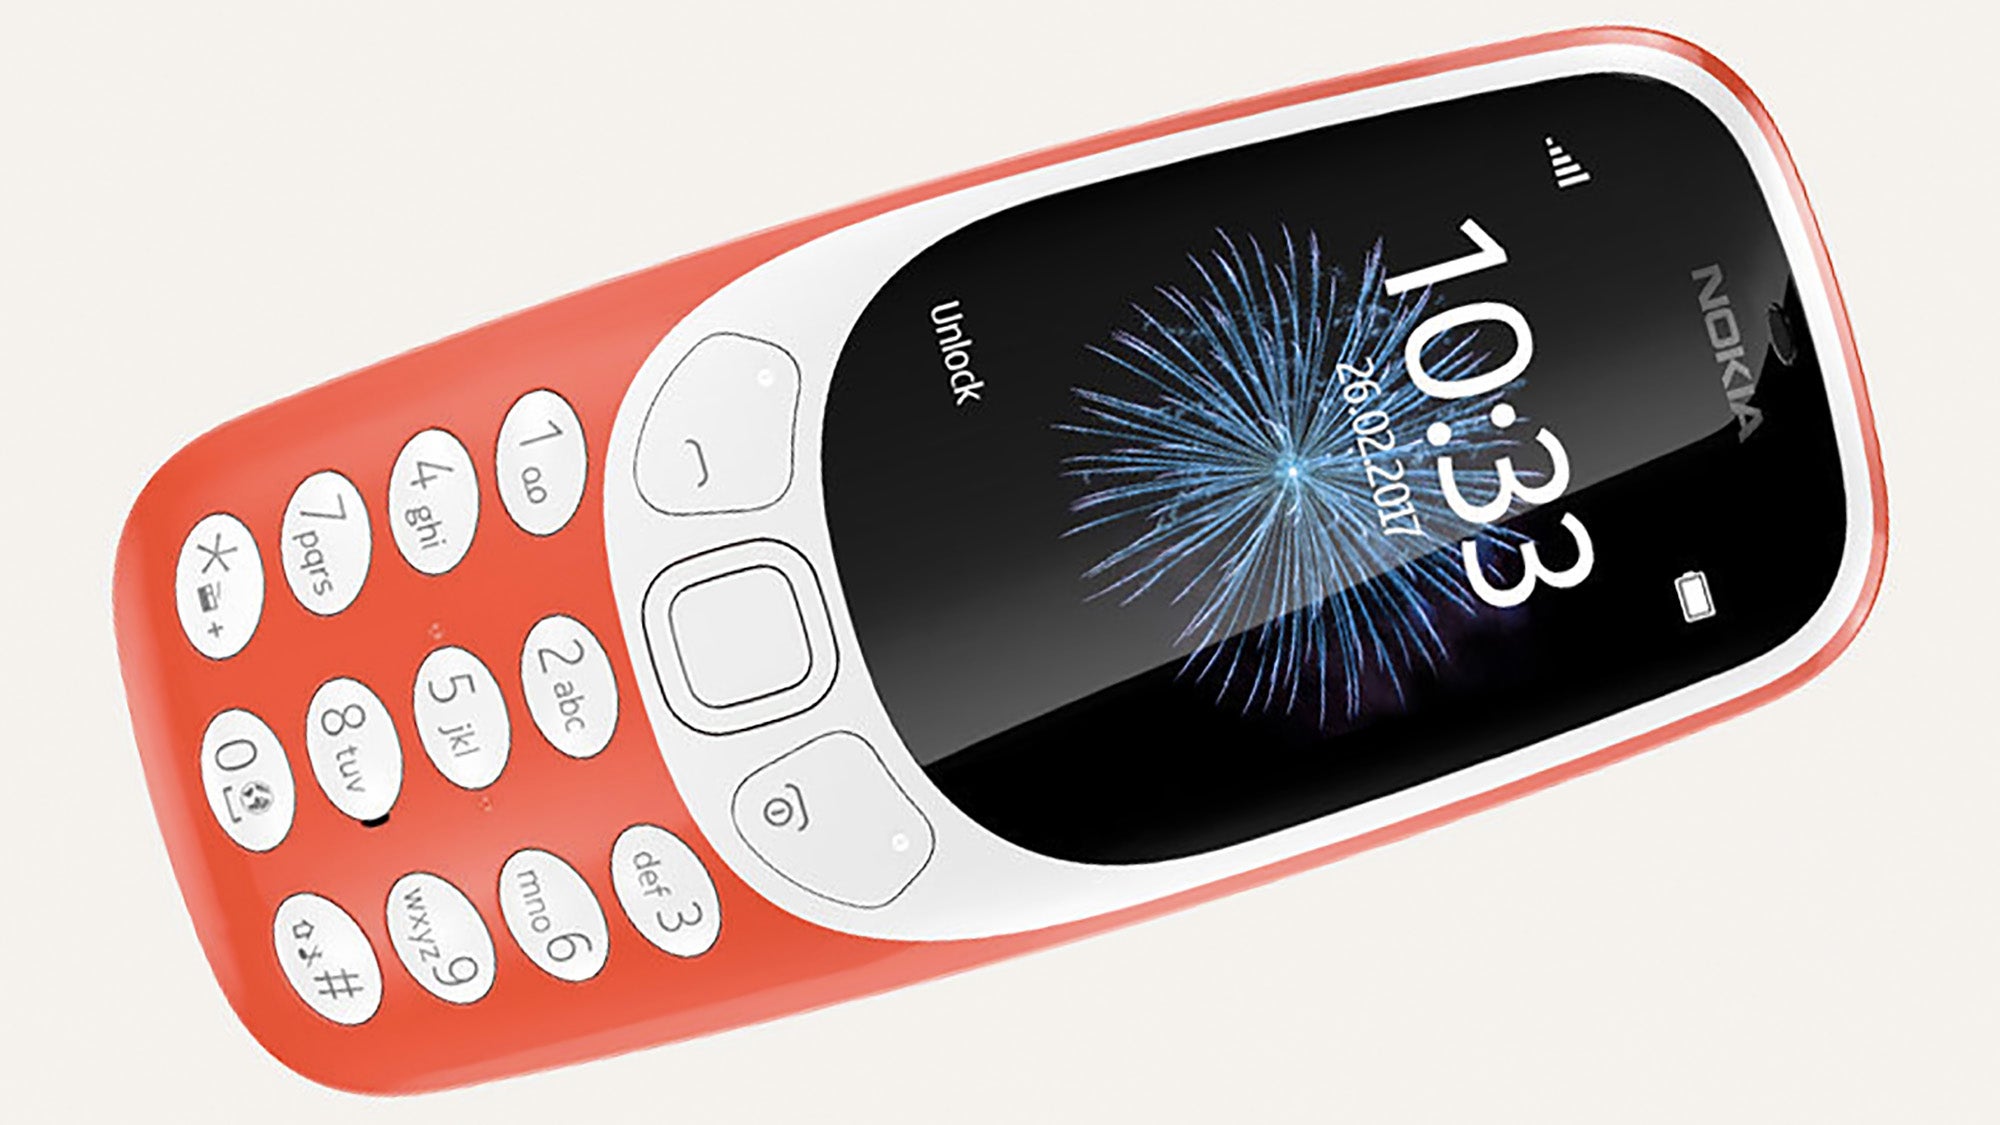 Nokia 3310 4G coming soon, reports claim | Trusted Reviews